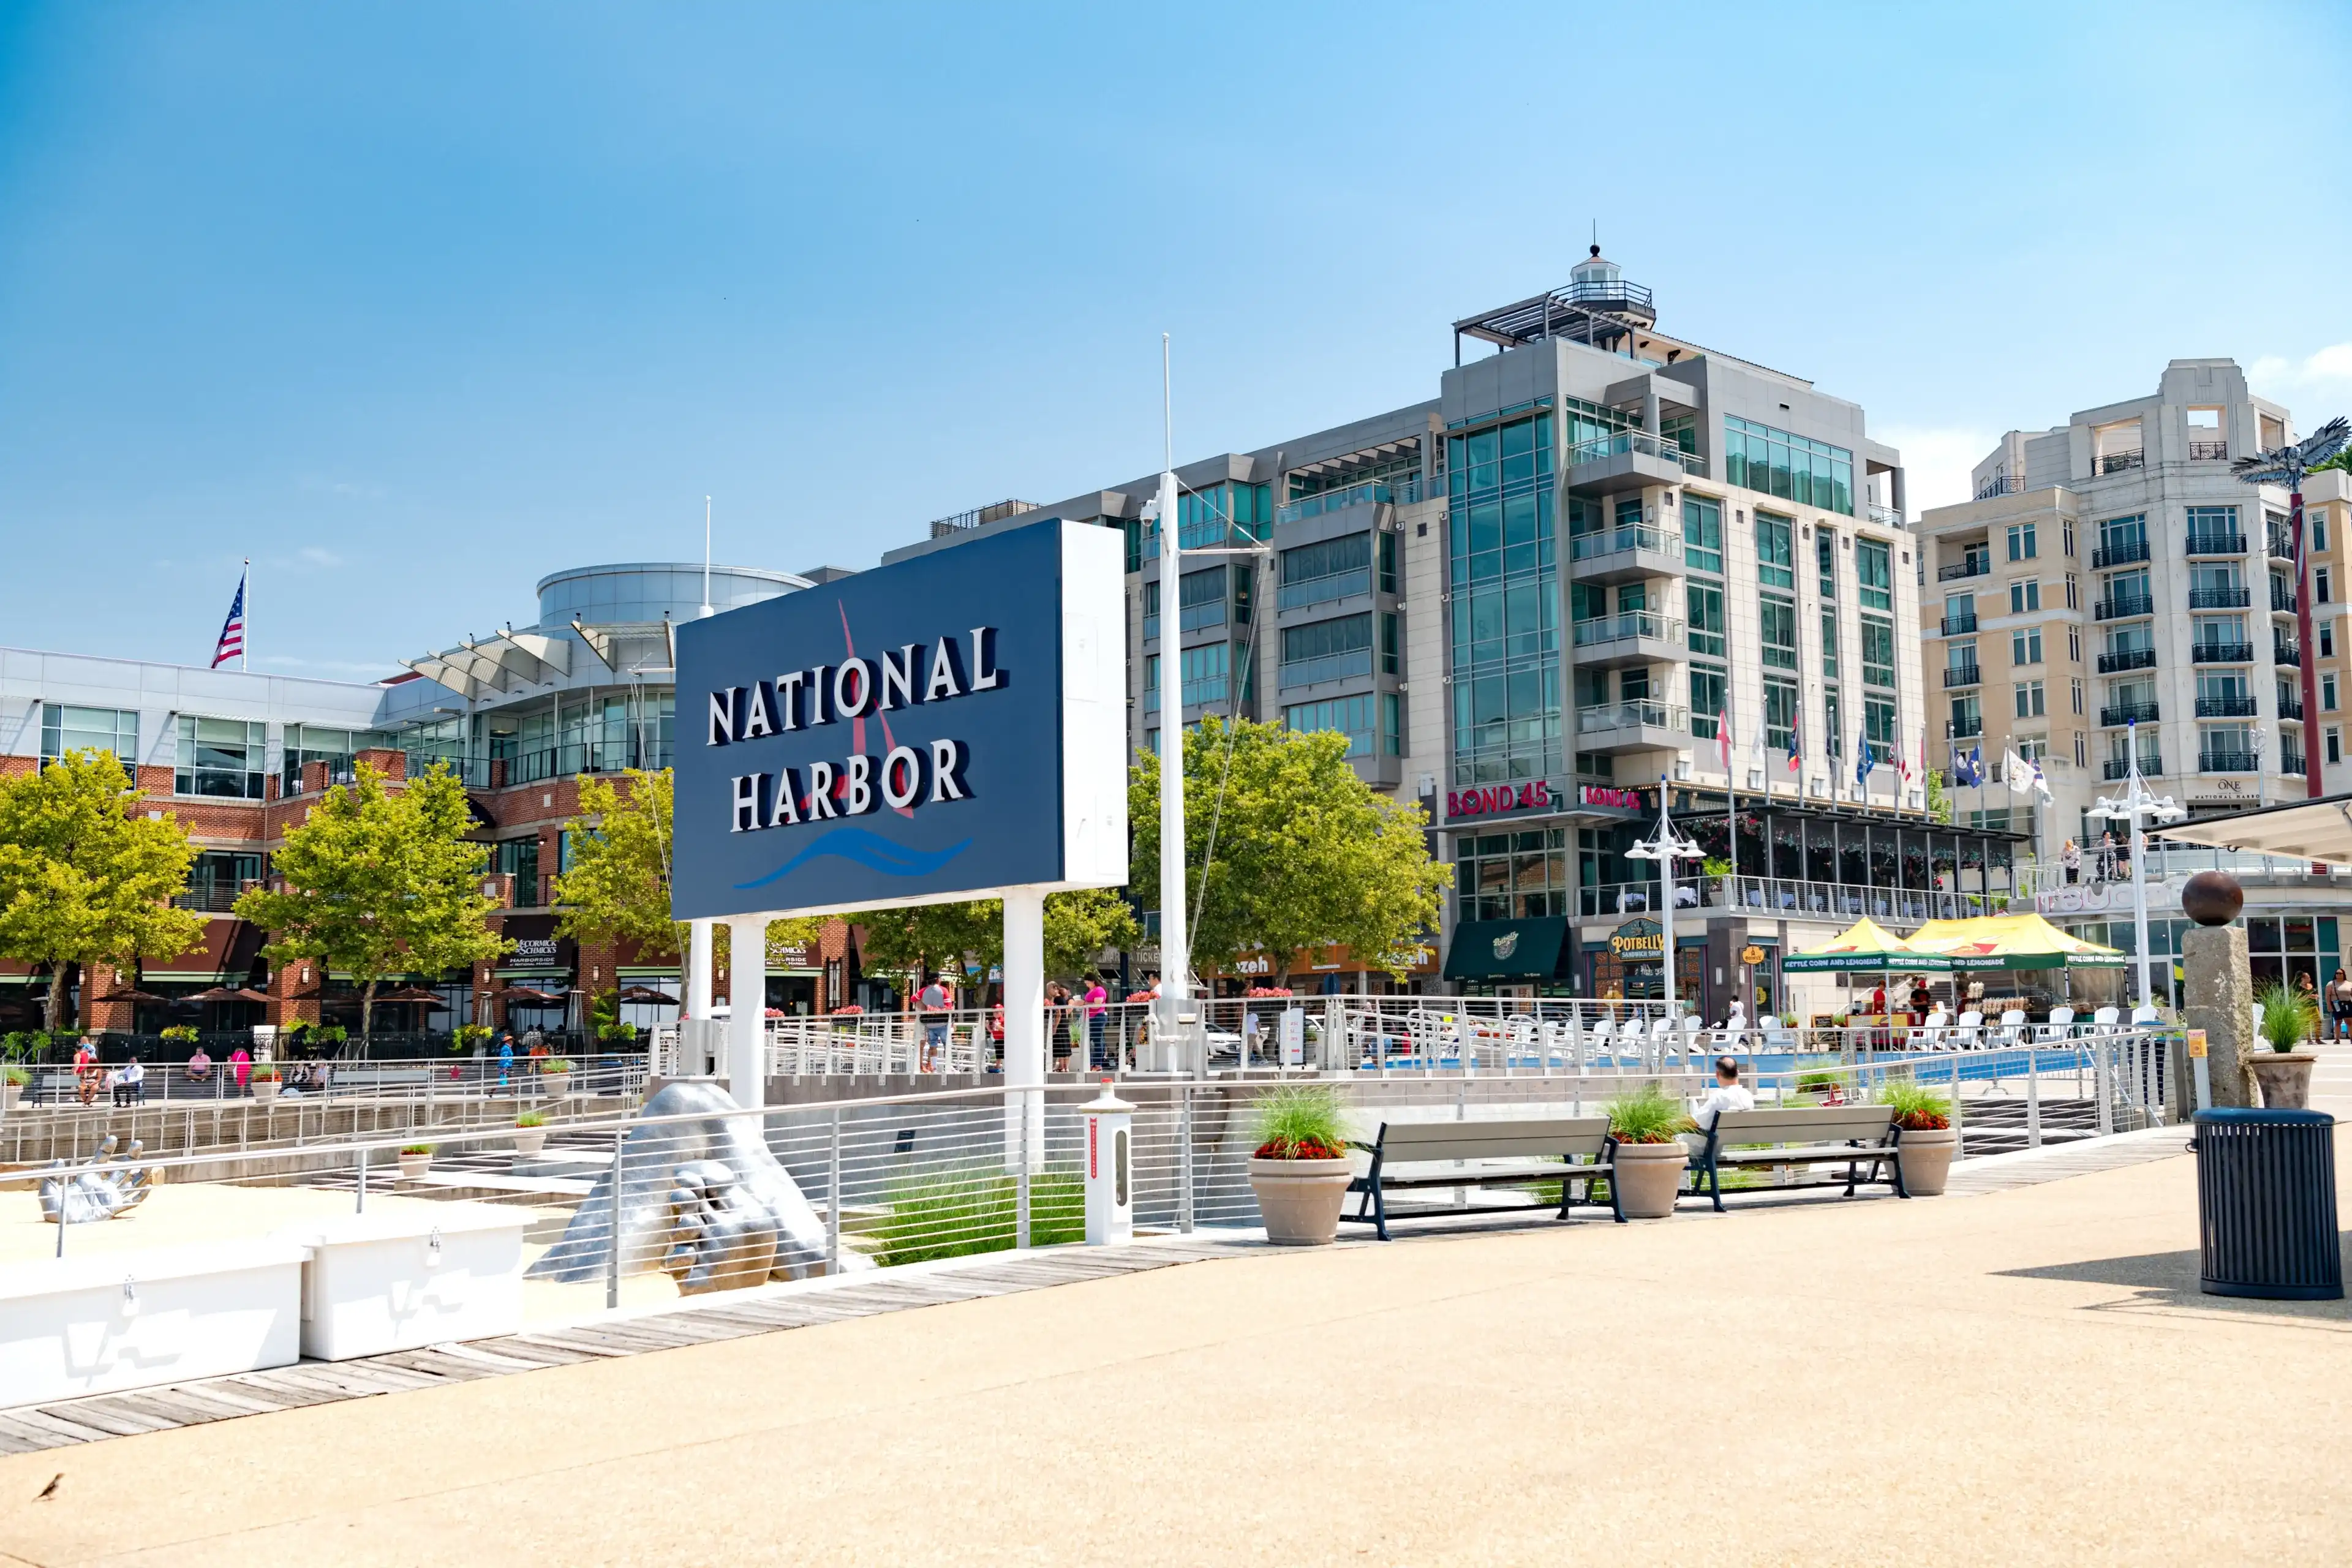  Best National Harbor hotels. Cheap hotels in National Harbor, Maryland, United States